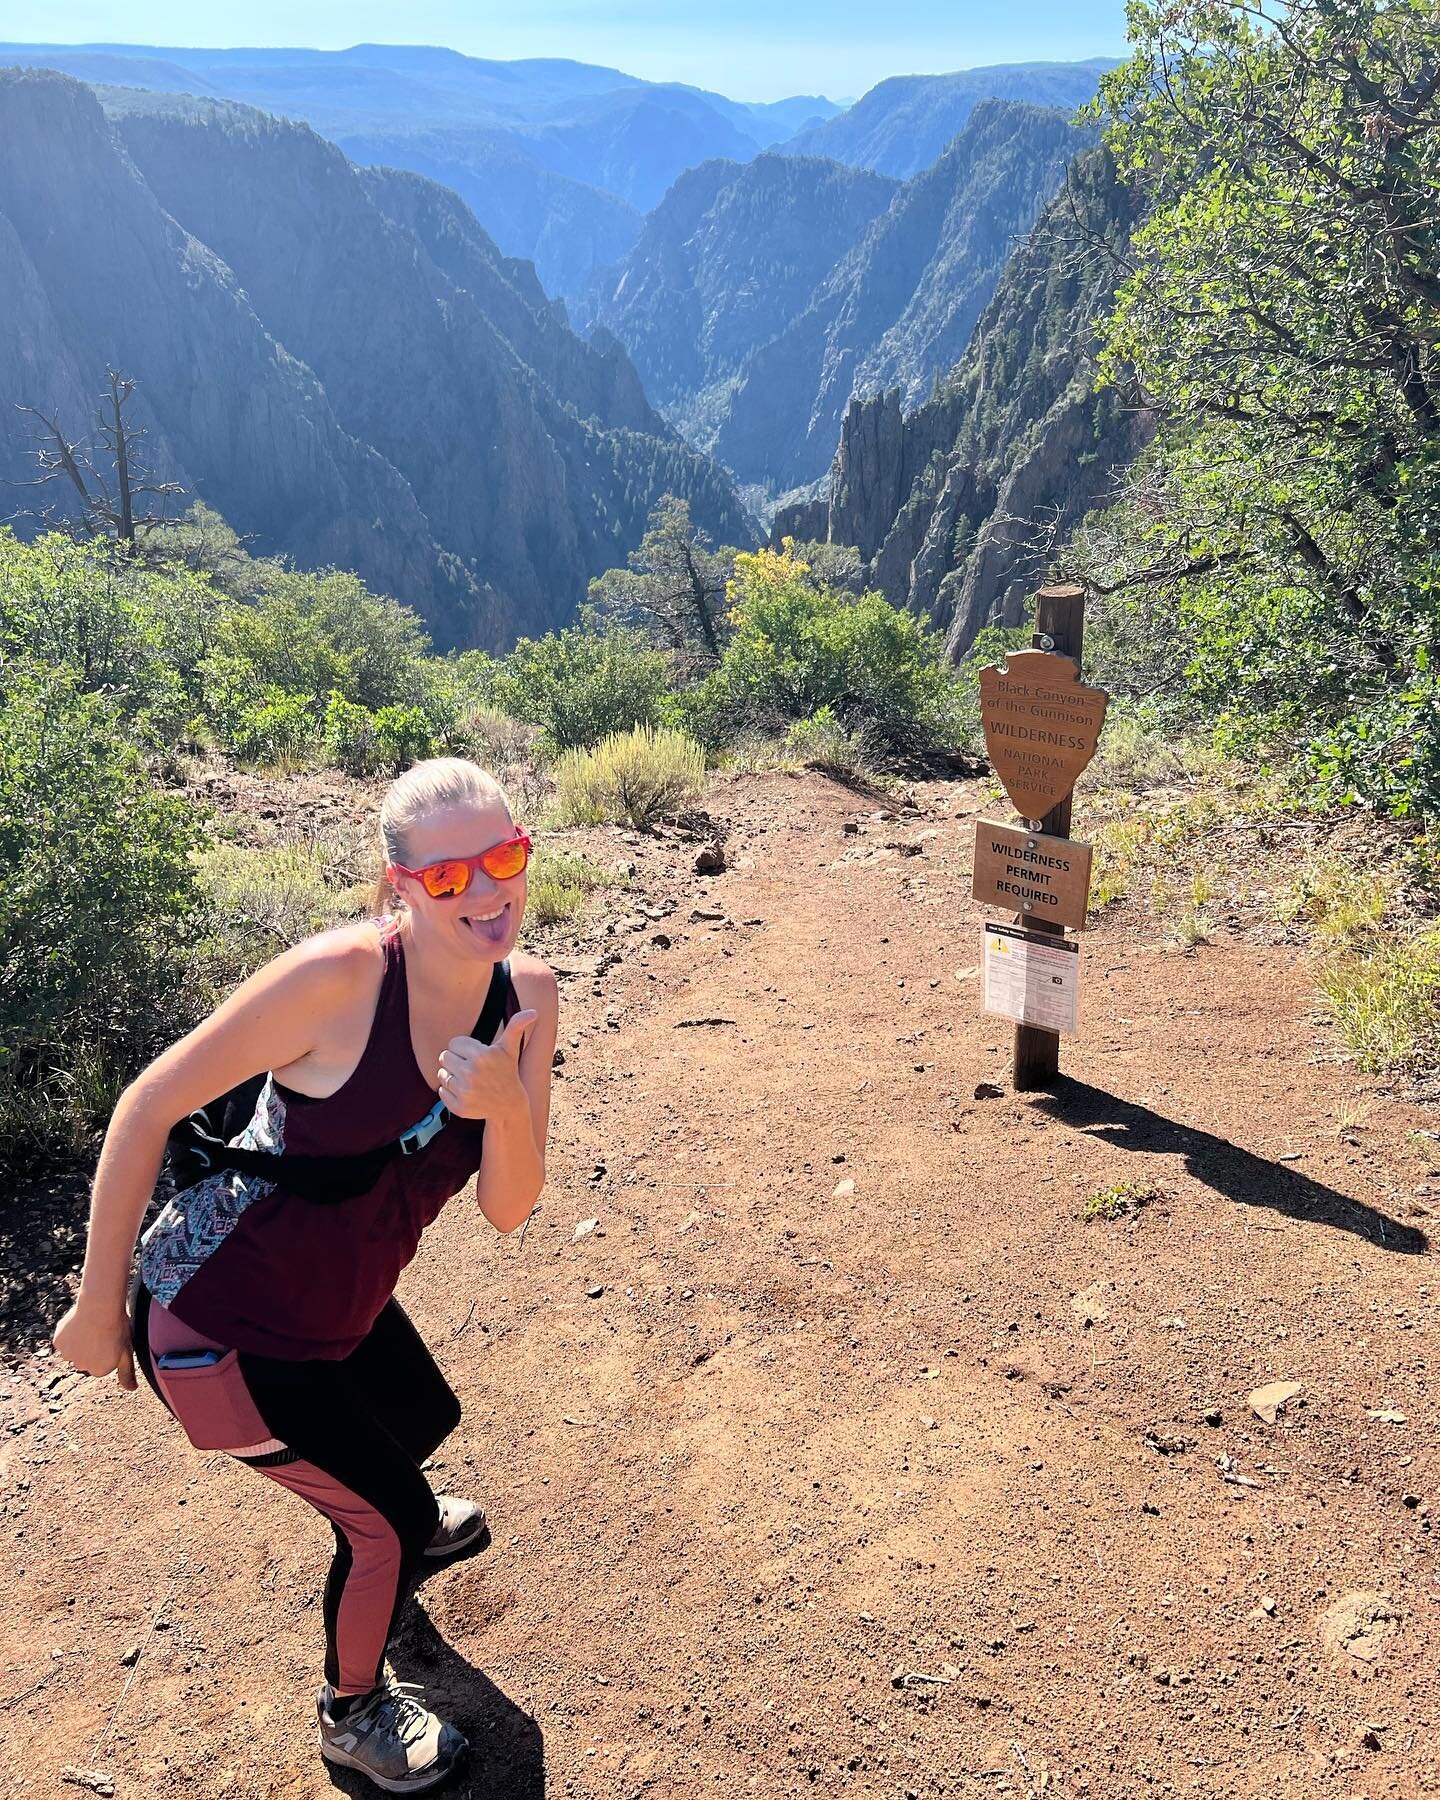 (1/2) The hike! Went trompin&rsquo; again, but inverse! Grueling, sunny and intense both in beauty and difficulty! We hiked 2,000 feet in just over a mile&hellip;. That&rsquo;s like 1 and a half Empire State buildings worth of elevation and damn if i